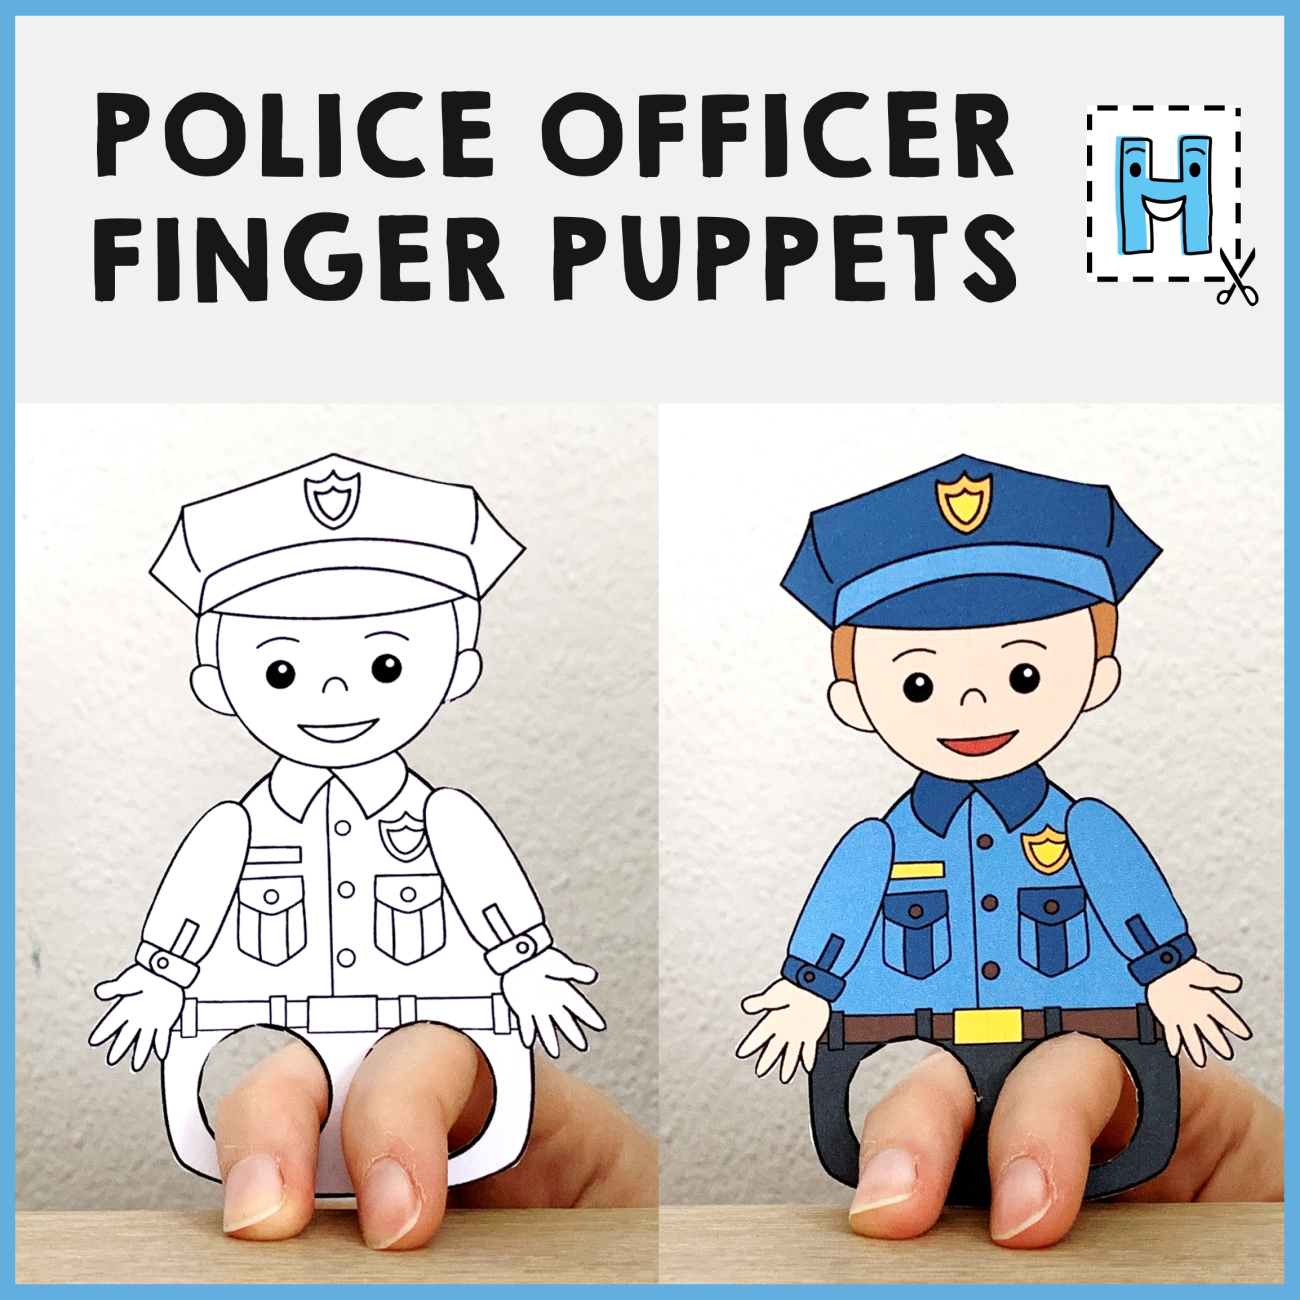 Police officer finger puppet printable career day coloring paper craft activity made by teachers